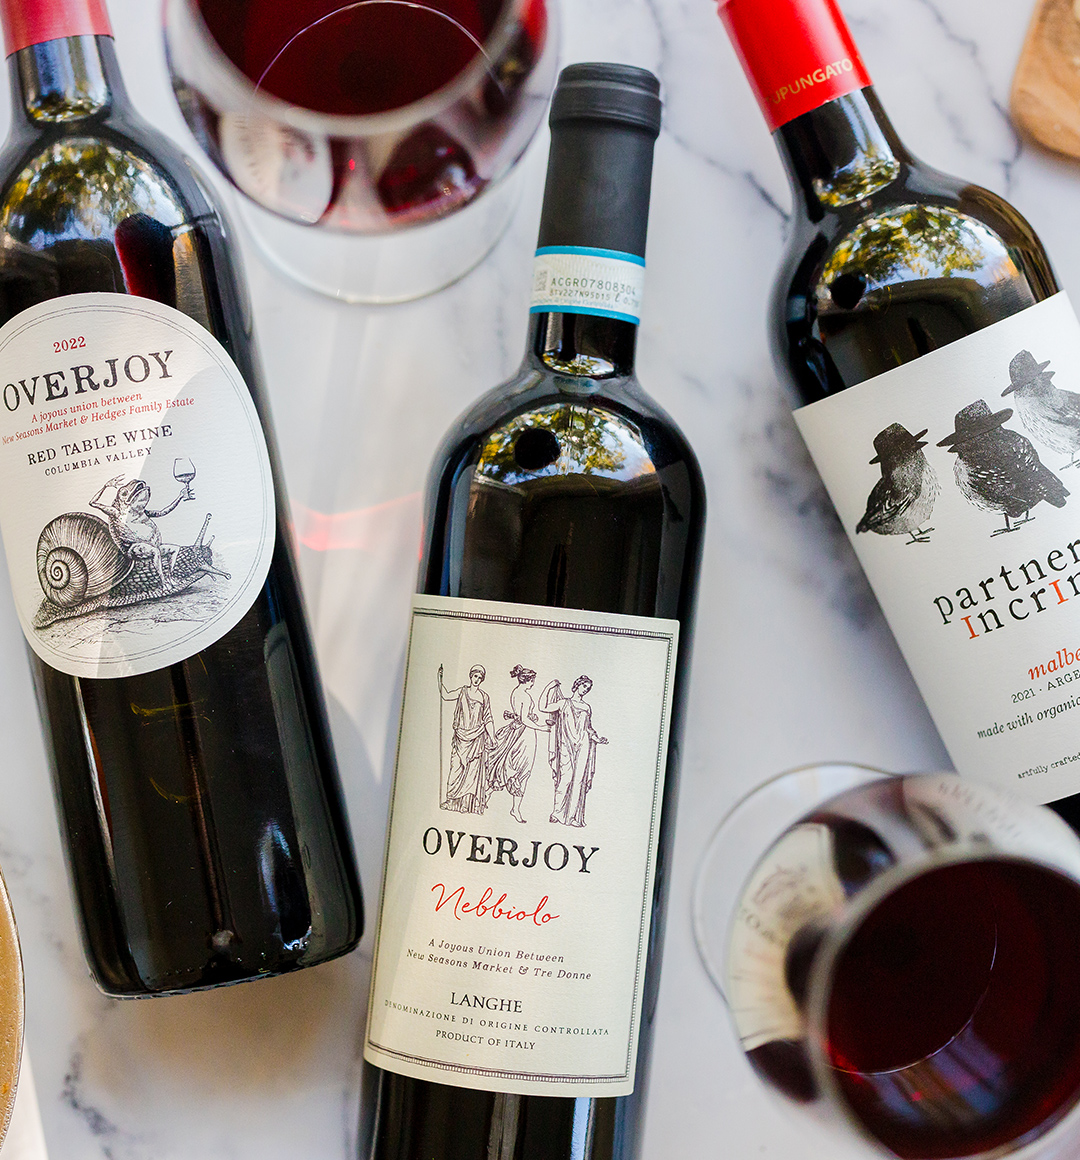 Three bottles of red wine on a tabletop from New Seasons wine partners Overjoy and Partners in Crime.